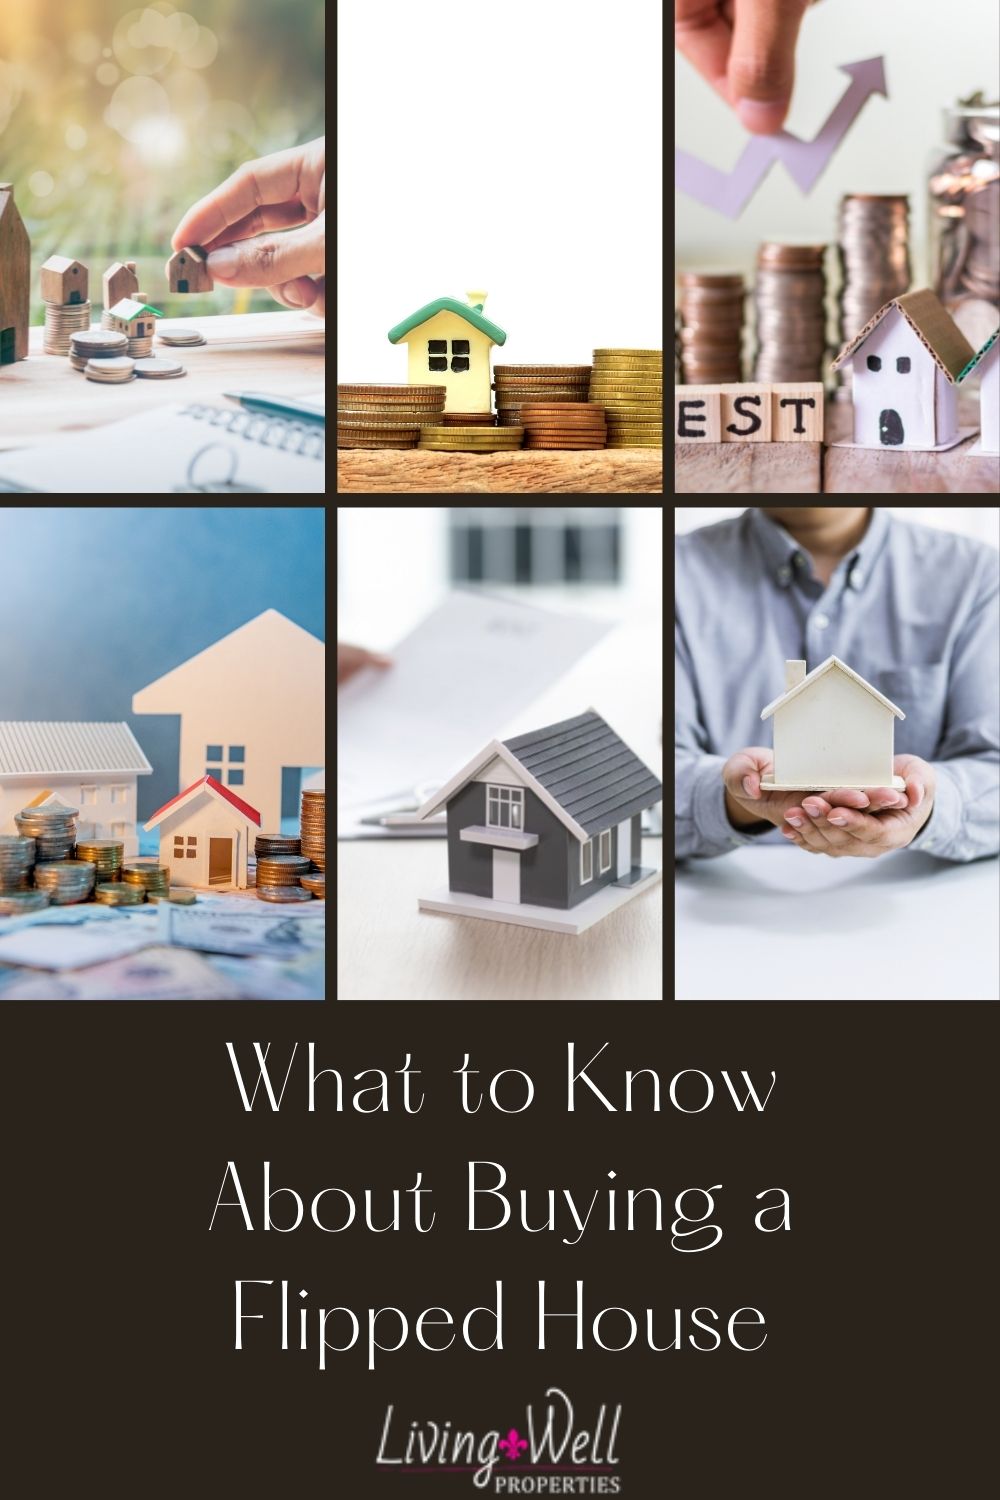 What to Know About Buying a Flipped House